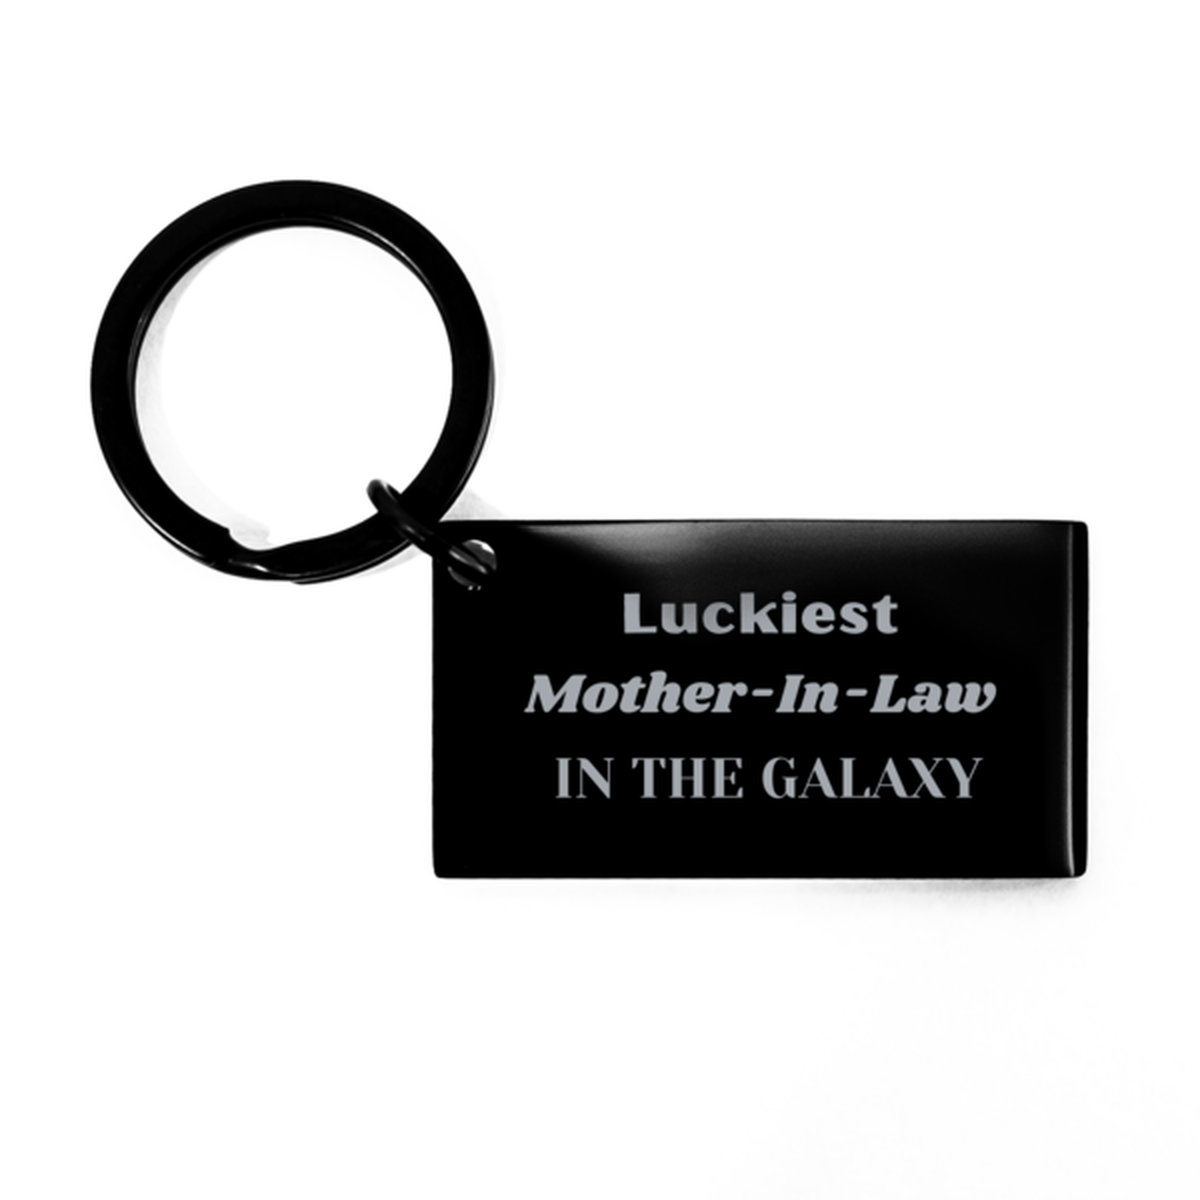 Luckiest Mother-In-Law in the Galaxy, To My Mother-In-Law Engraved Gifts, Christmas Mother-In-Law Keychain Gifts, X-mas Birthday Unique Gifts For Mother-In-Law Men Women